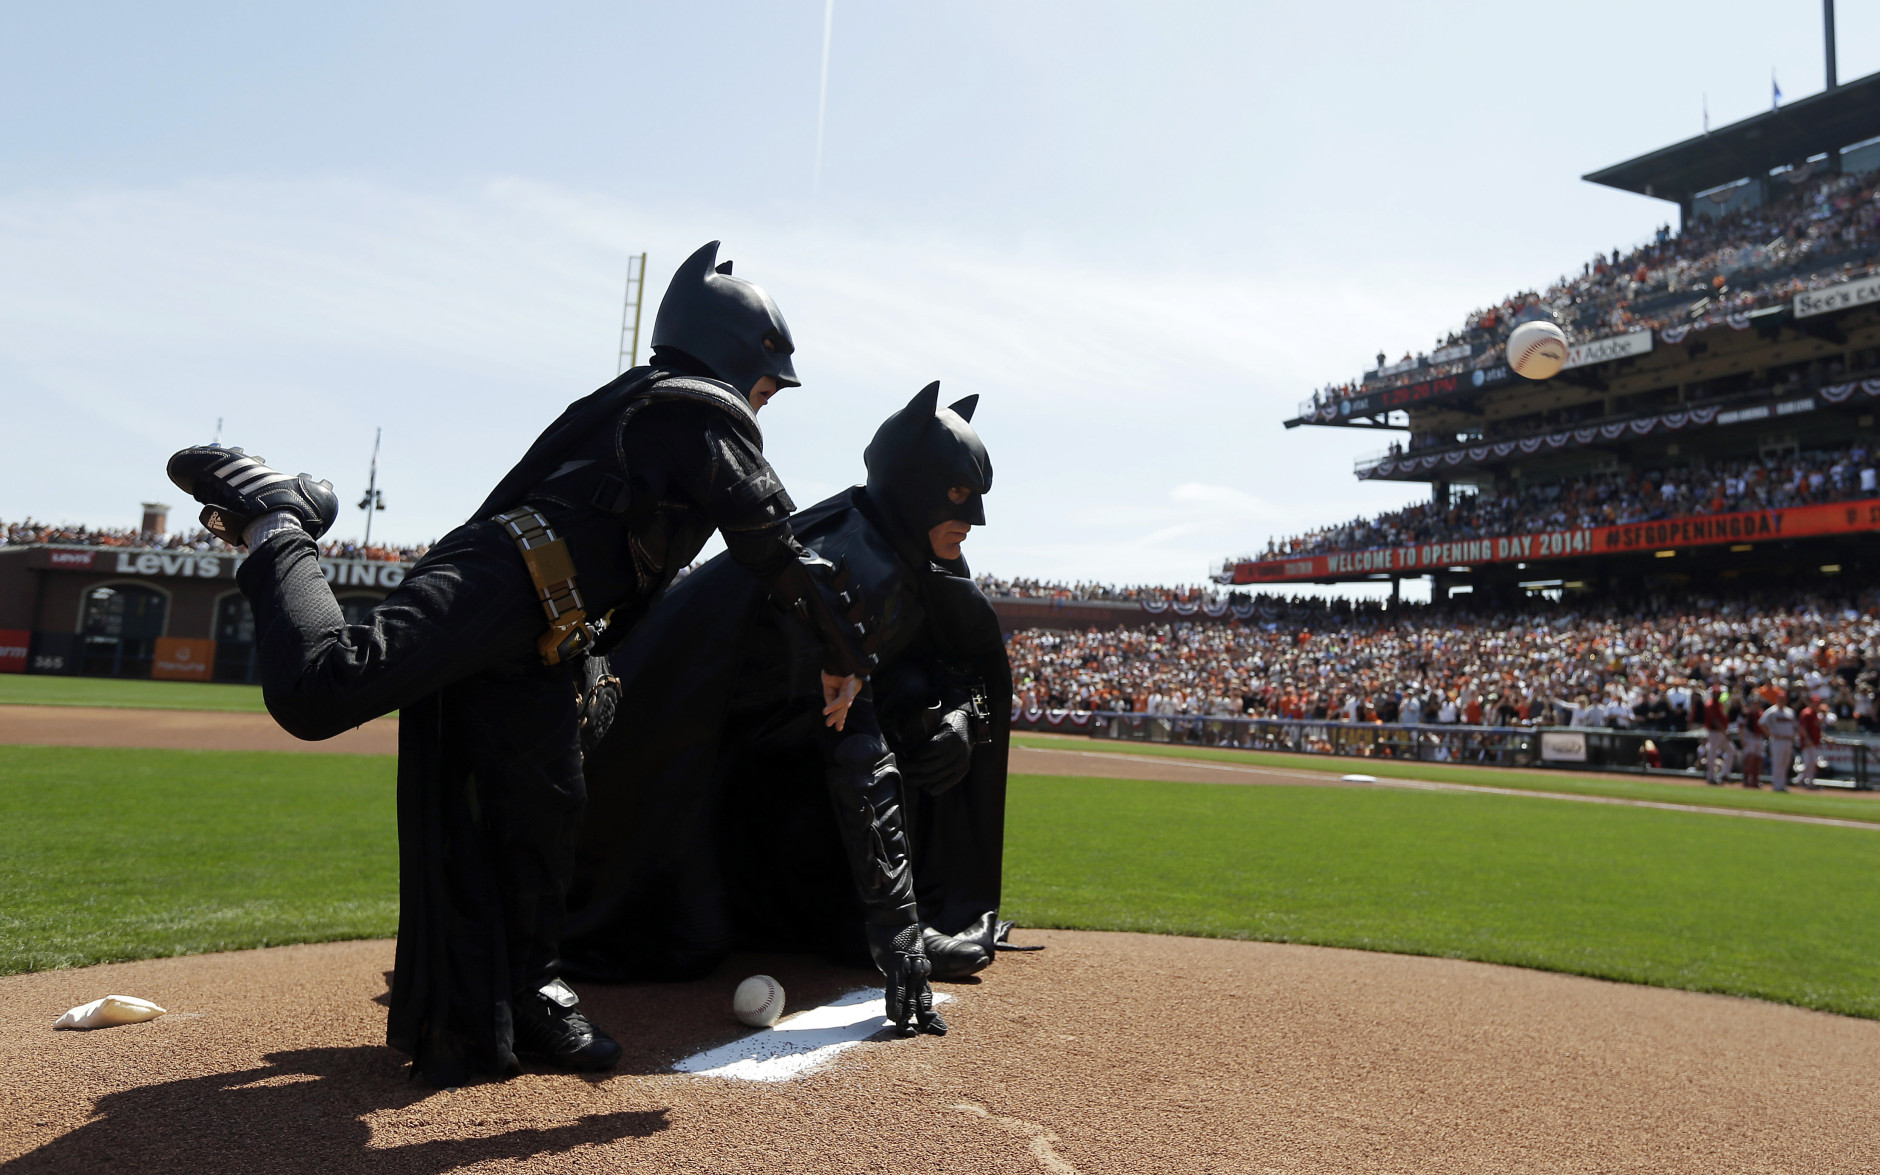 FOR USE AS DESIRED, YEAR END PHOTOS - FILE - Miles Scott, left, dressed as Batkid, throws the ceremonial first pitch next to Batman before an opening day baseball game between the San Francisco Giants and the Arizona Diamondbacks in San Francisco, Tuesday, April 8, 2014. On Nov. 15, 2013, Scott, a Northern California boy with leukemia, fought villains and rescued a damsel in distress as a caped crusader through The Greater Bay Area Make-A-Wish Foundation. (AP Photo/Eric Risberg, Pool, File)